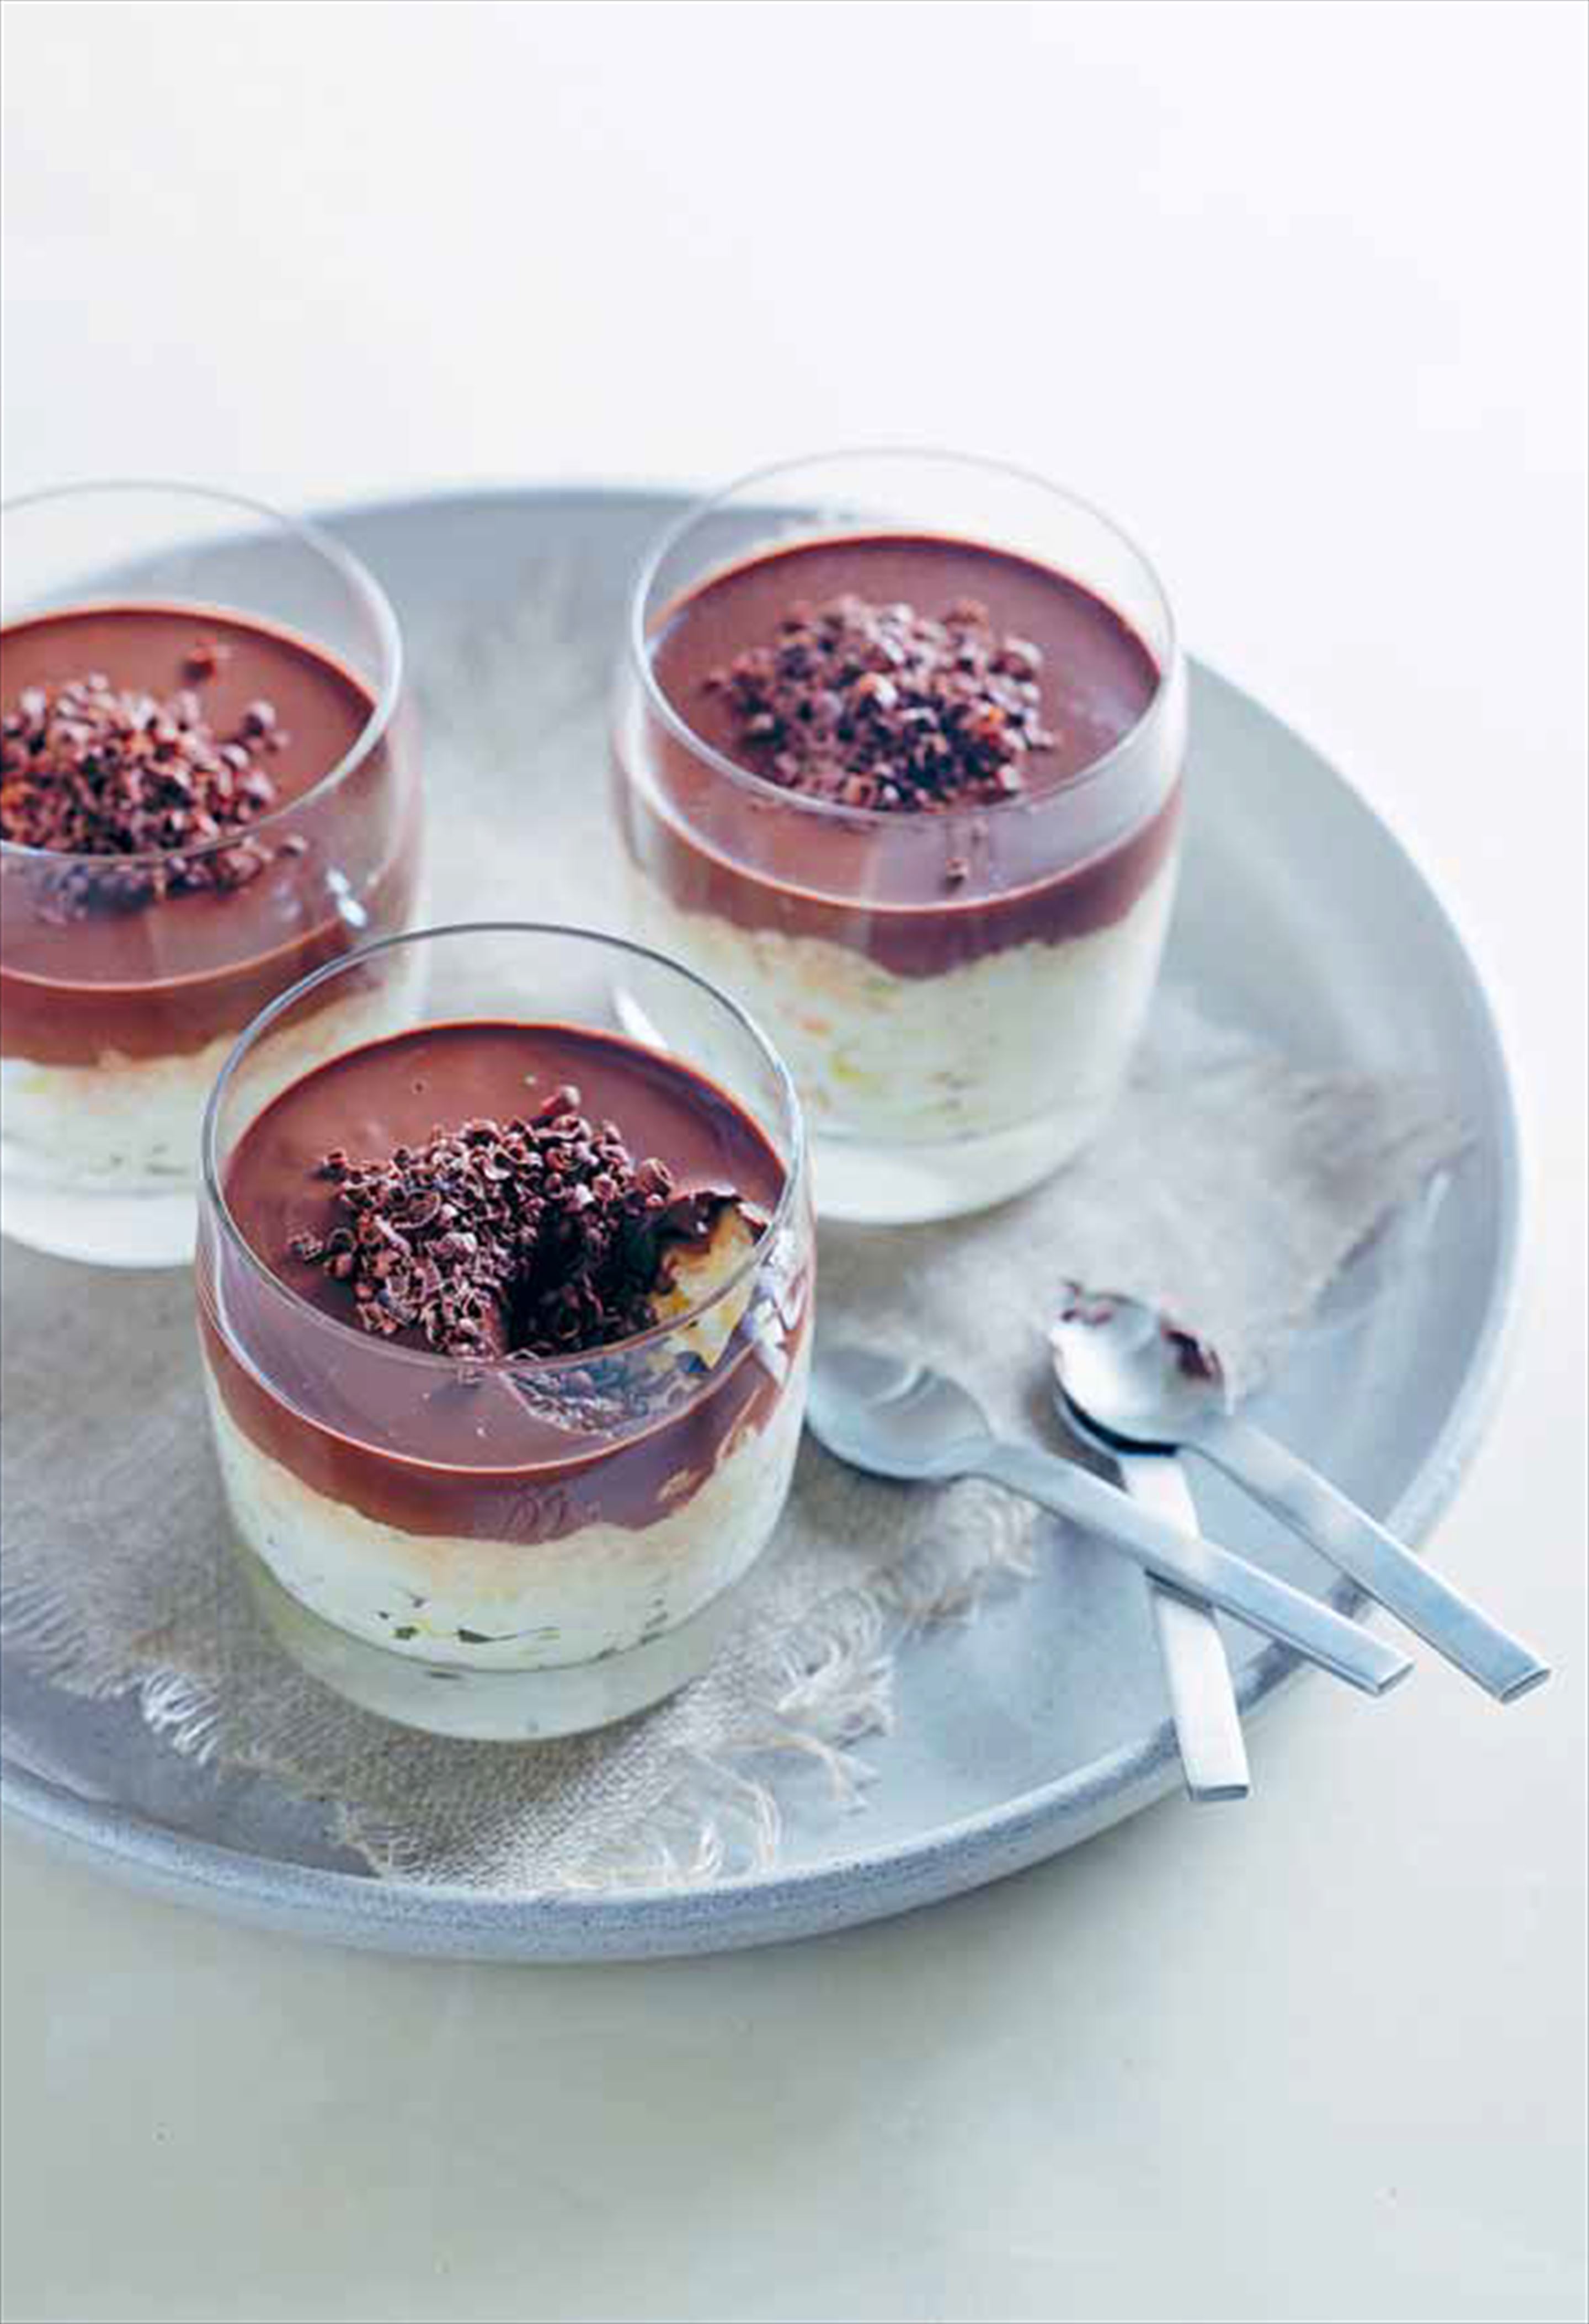 Rice pudding with glacé fruits and chocolate cream